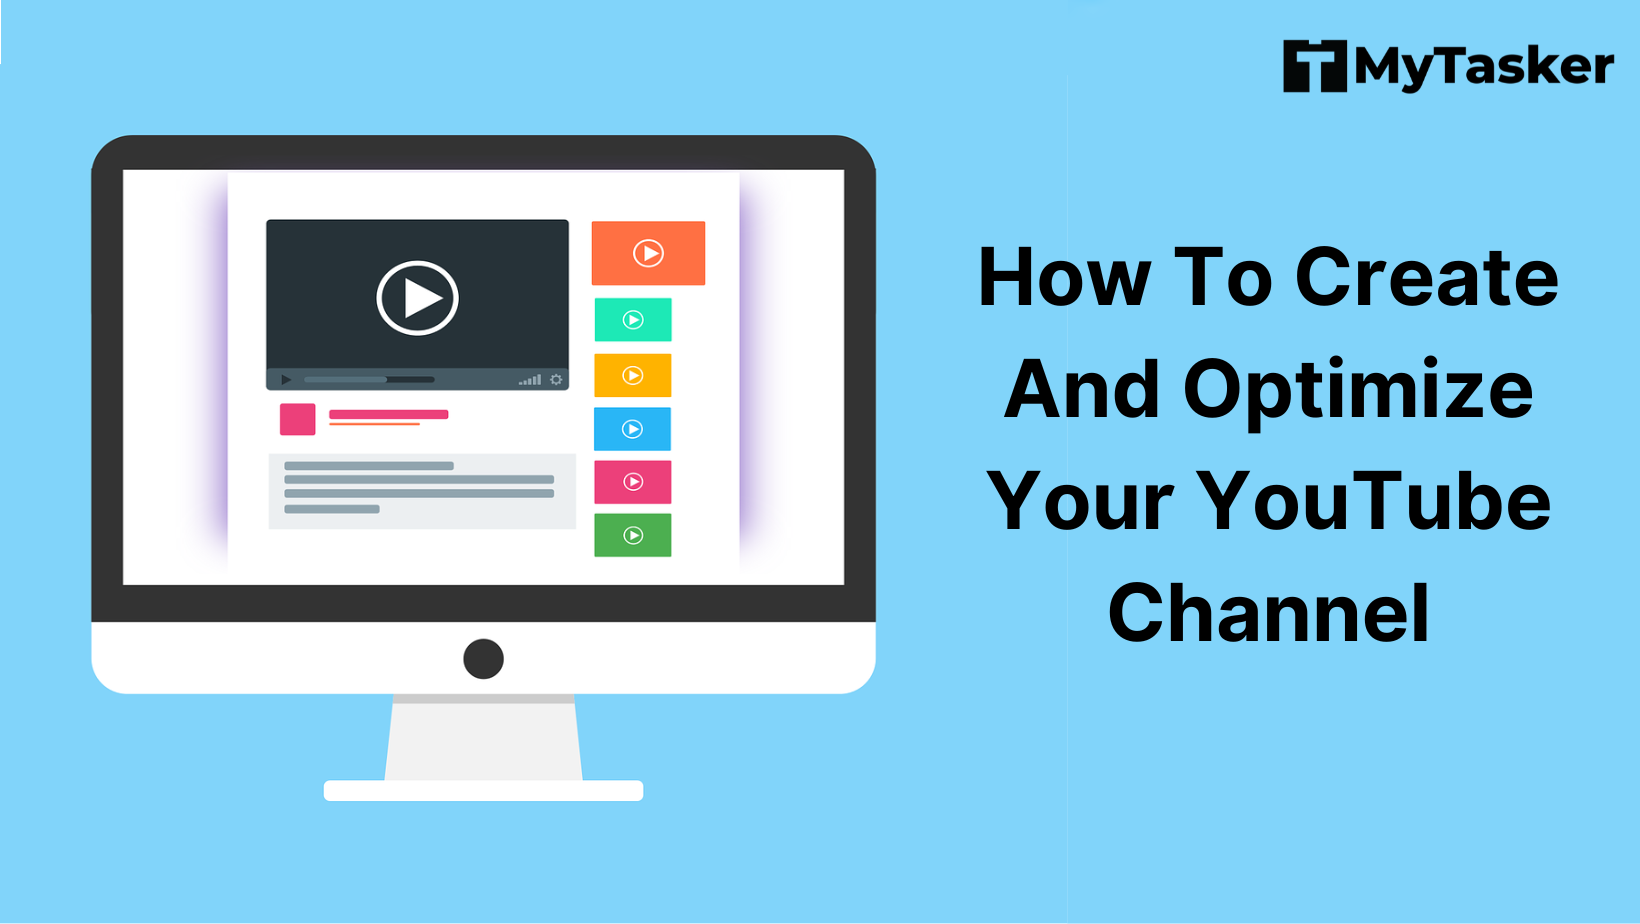 How To Create And Optimize Your YouTube Channel